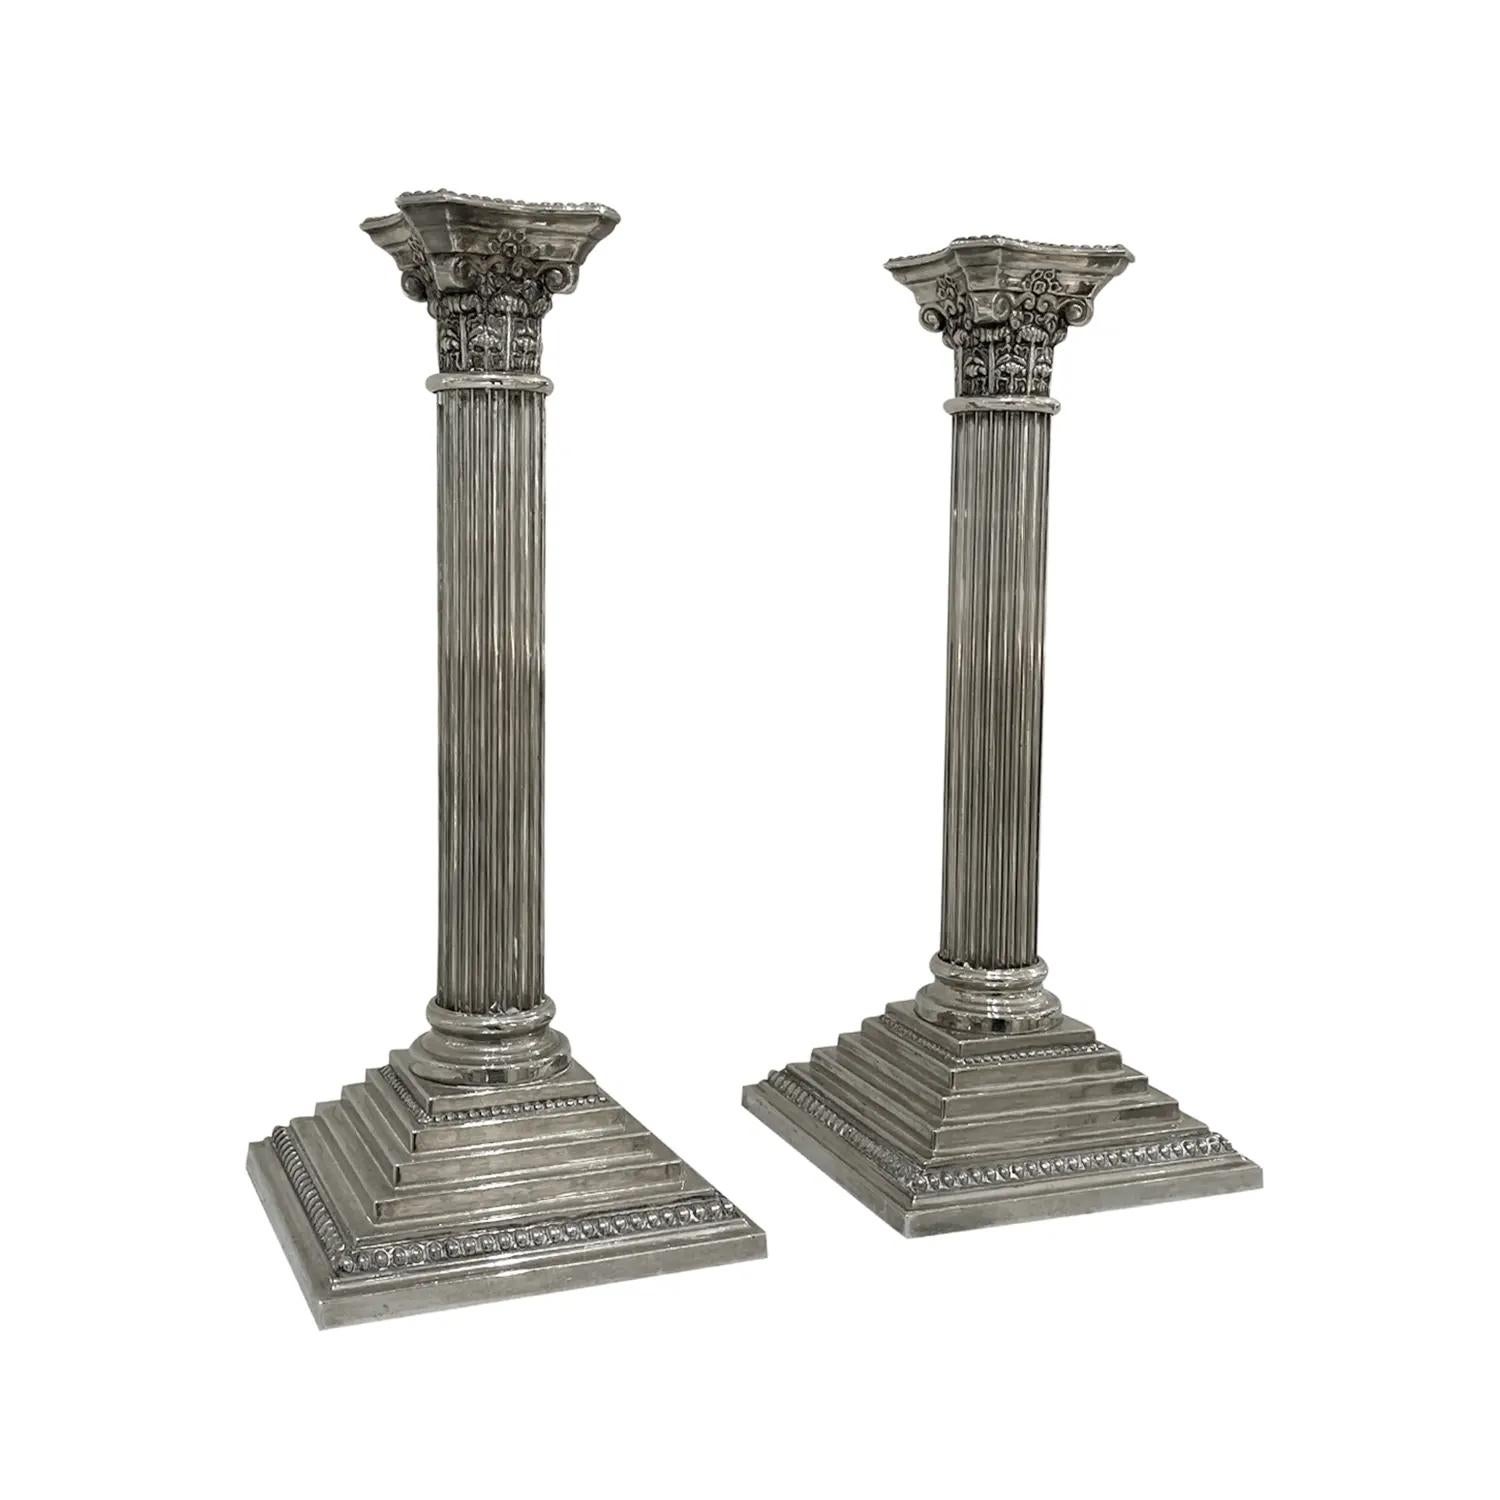 A vintage late Mid-Century Modern American pair of candle holders made of hand crafted silver-plated metal, produced by Godinger in good condition. The candlesticks represent the Swedish Gustavian time period. Manufacturer label at the bottom. Dated